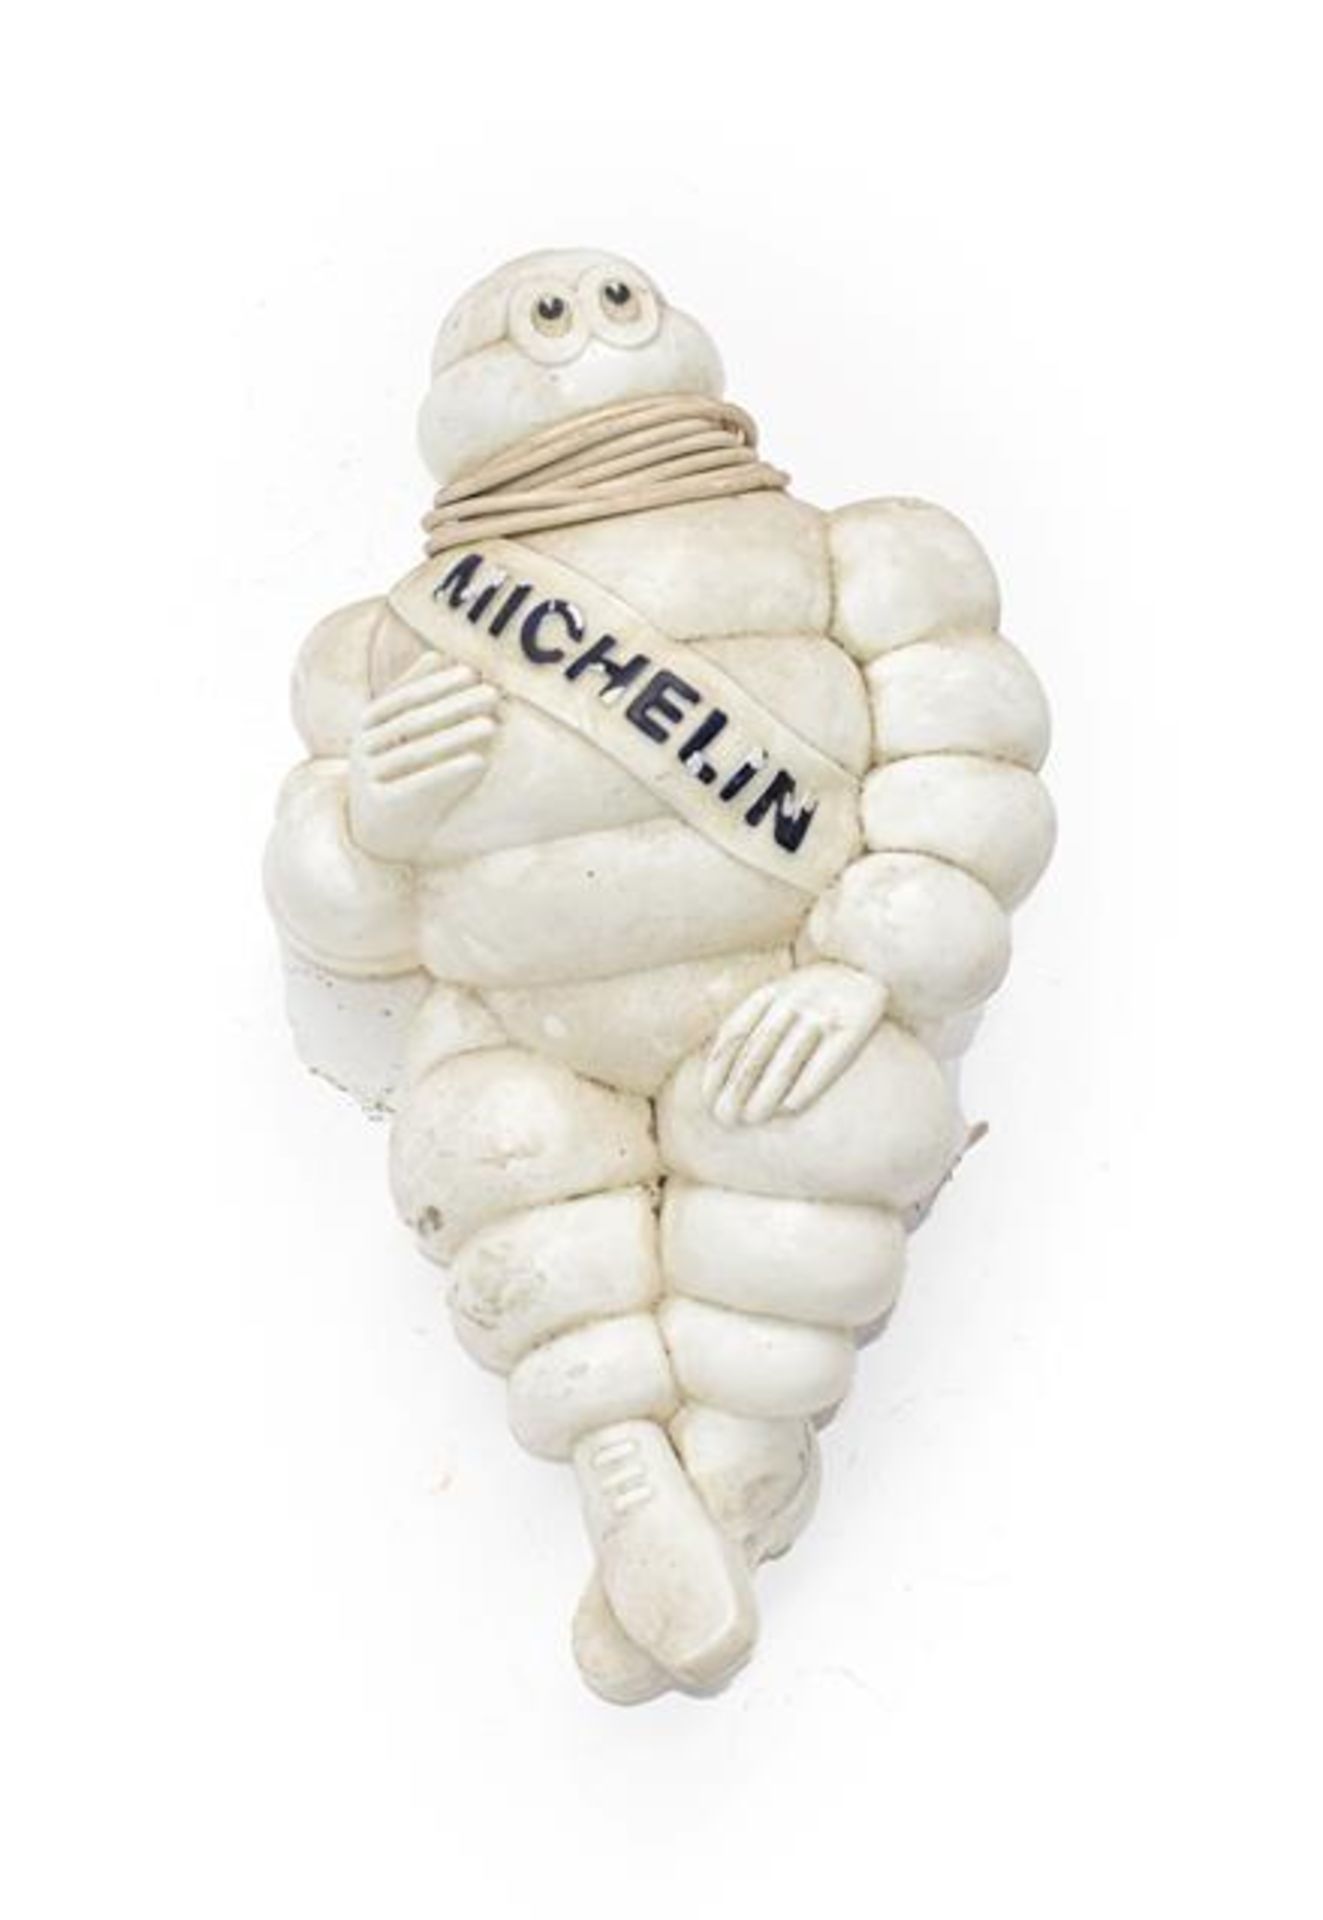 An Illuminated Michelin Man Advertising Figure, seated on a metal mounted bracket fitted with two-